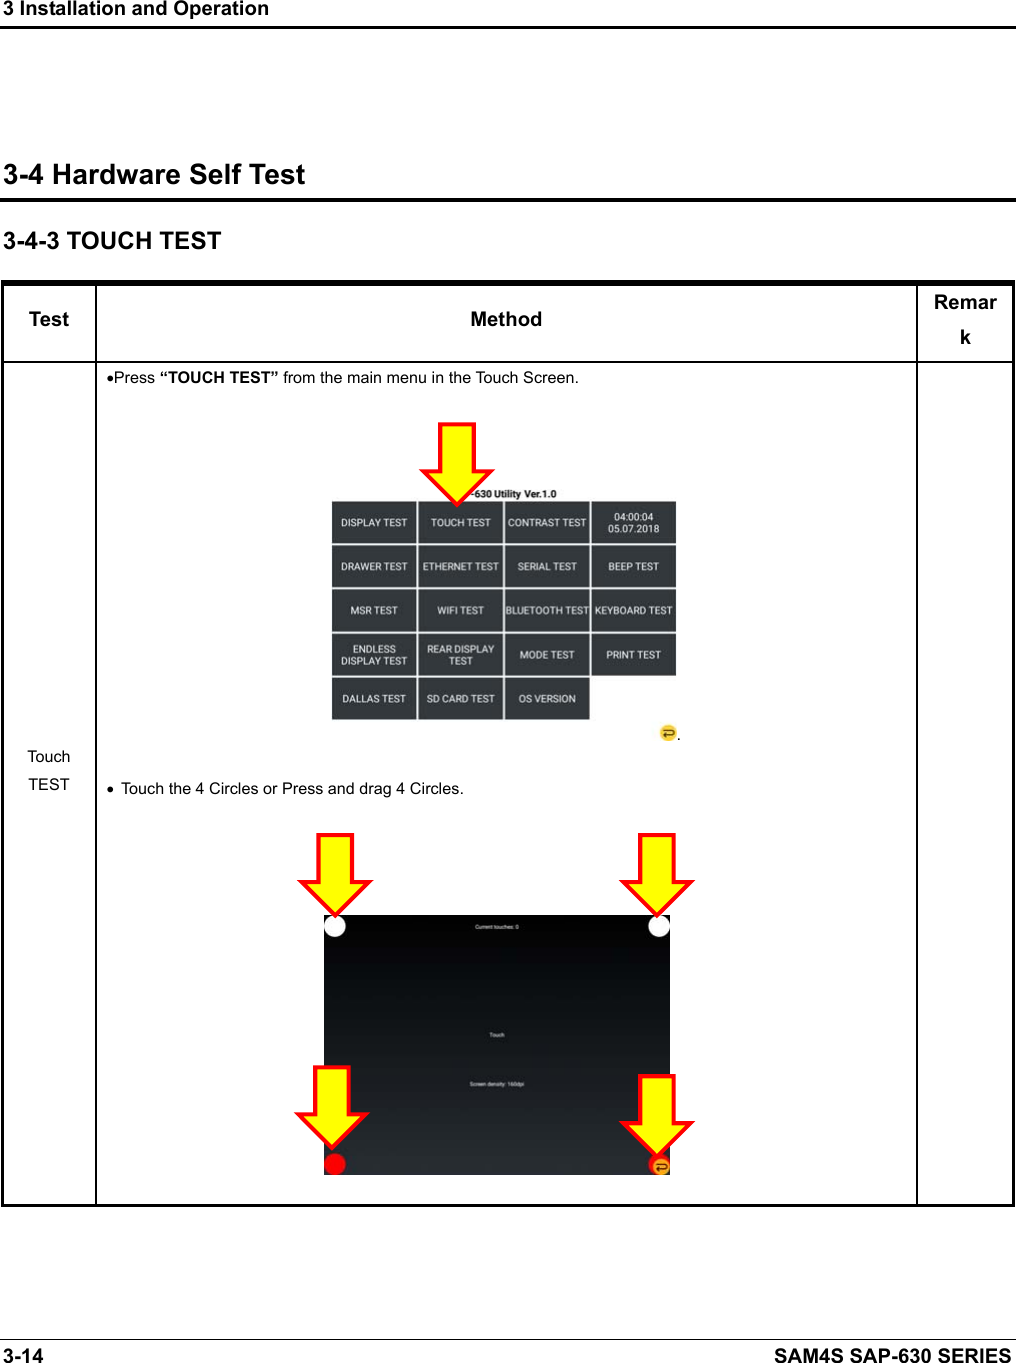 3 Installation and Operation 3-14    SAM4S SAP-630 SERIES    3-4 Hardware Self Test 3-4-3 TOUCH TEST Test  Method  Remark Touch TEST Press “TOUCH TEST” from the main menu in the Touch Screen. .    Touch the 4 Circles or Press and drag 4 Circles.       